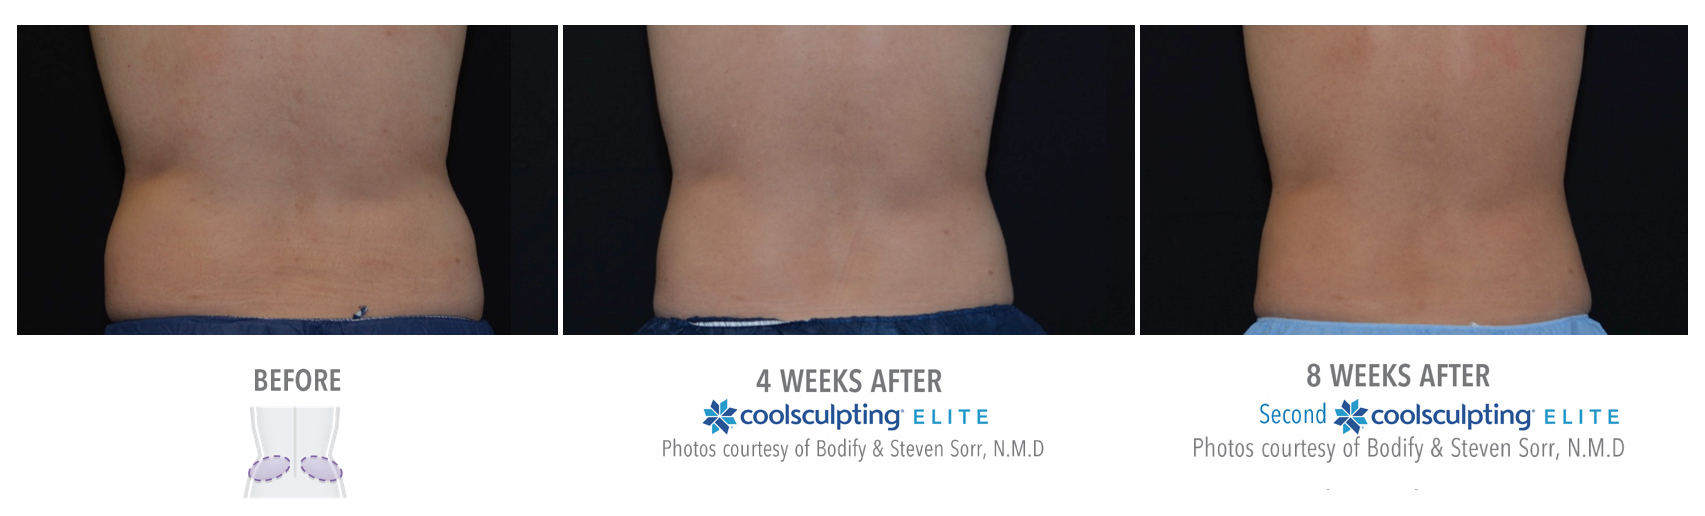 Coolsculpting Treatment Results on a Male Love Handles | Melindas Med-Spa & Salon in North Myrtle Beach SC